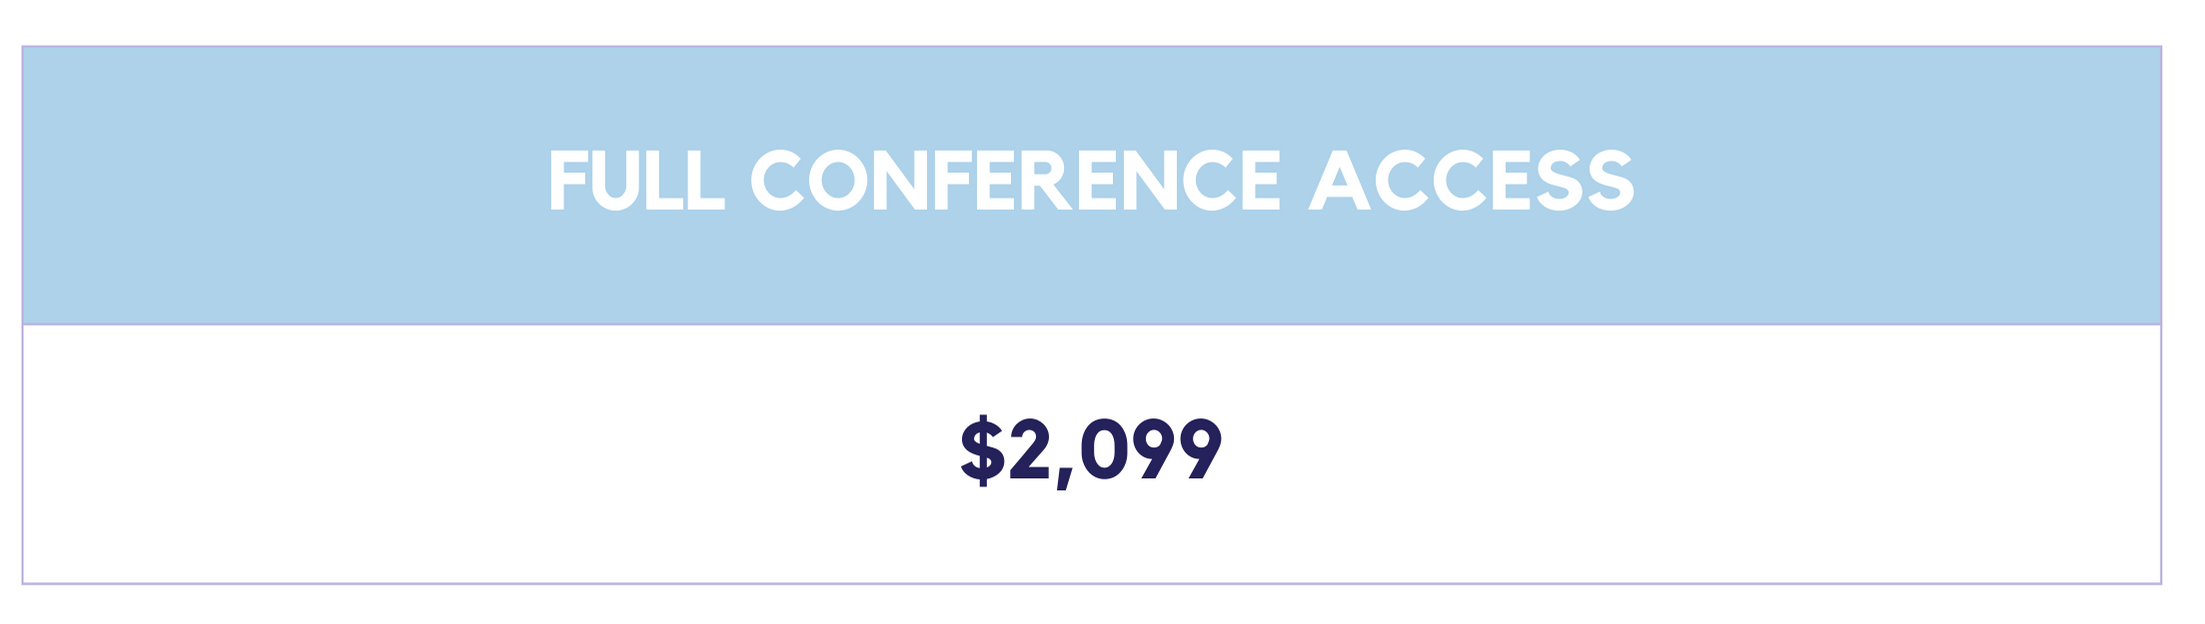 Full Conference Access